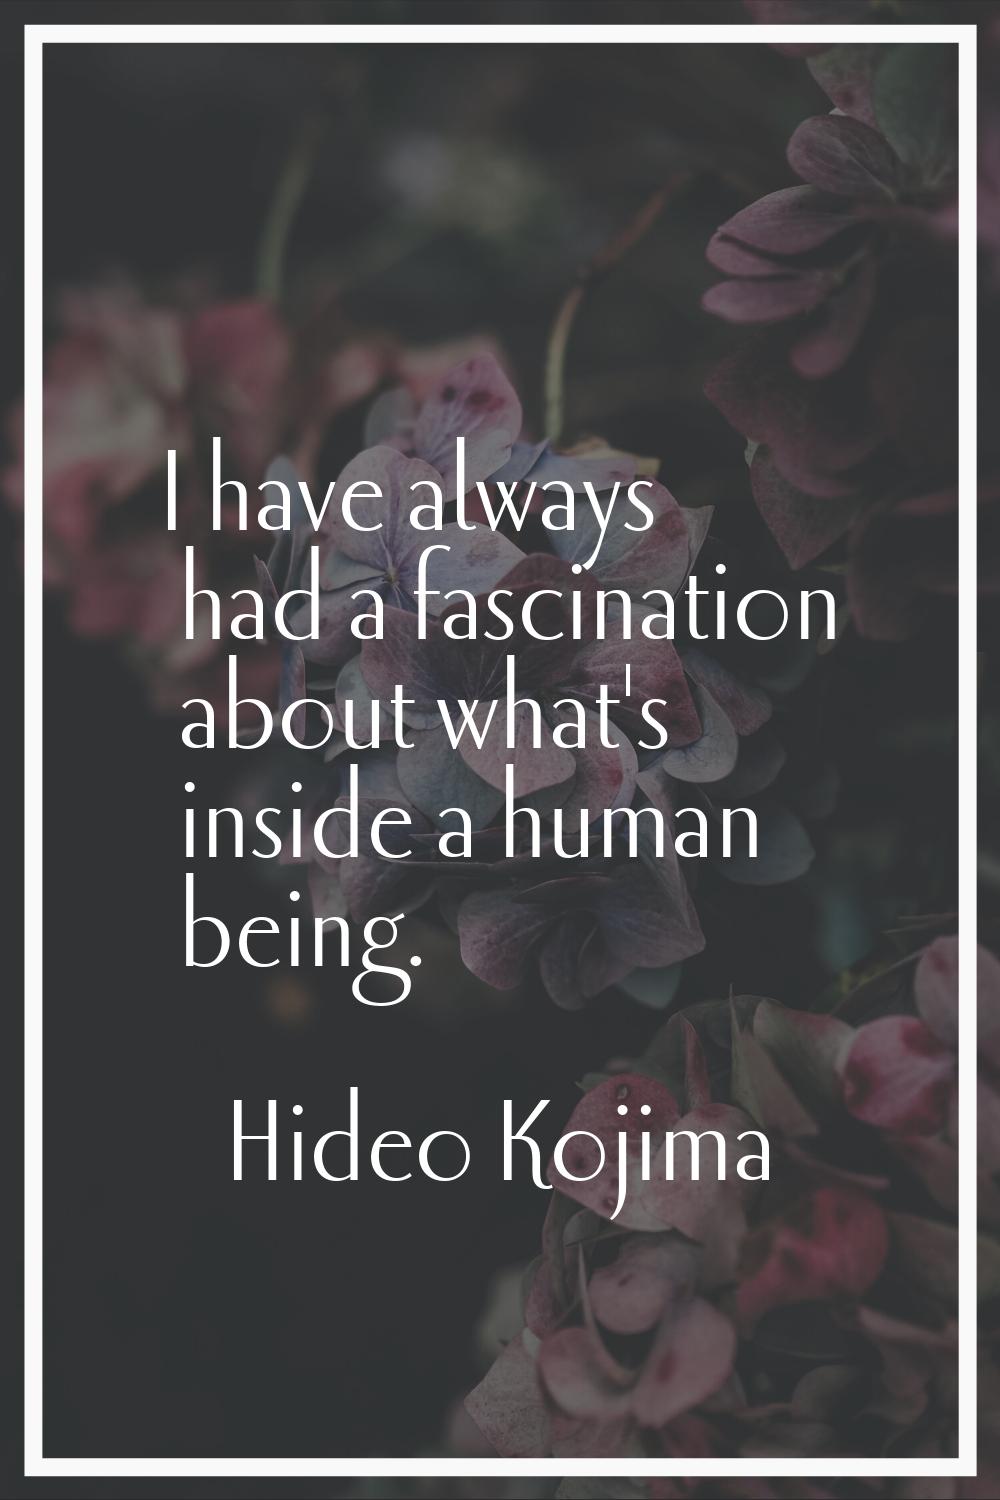 I have always had a fascination about what's inside a human being.